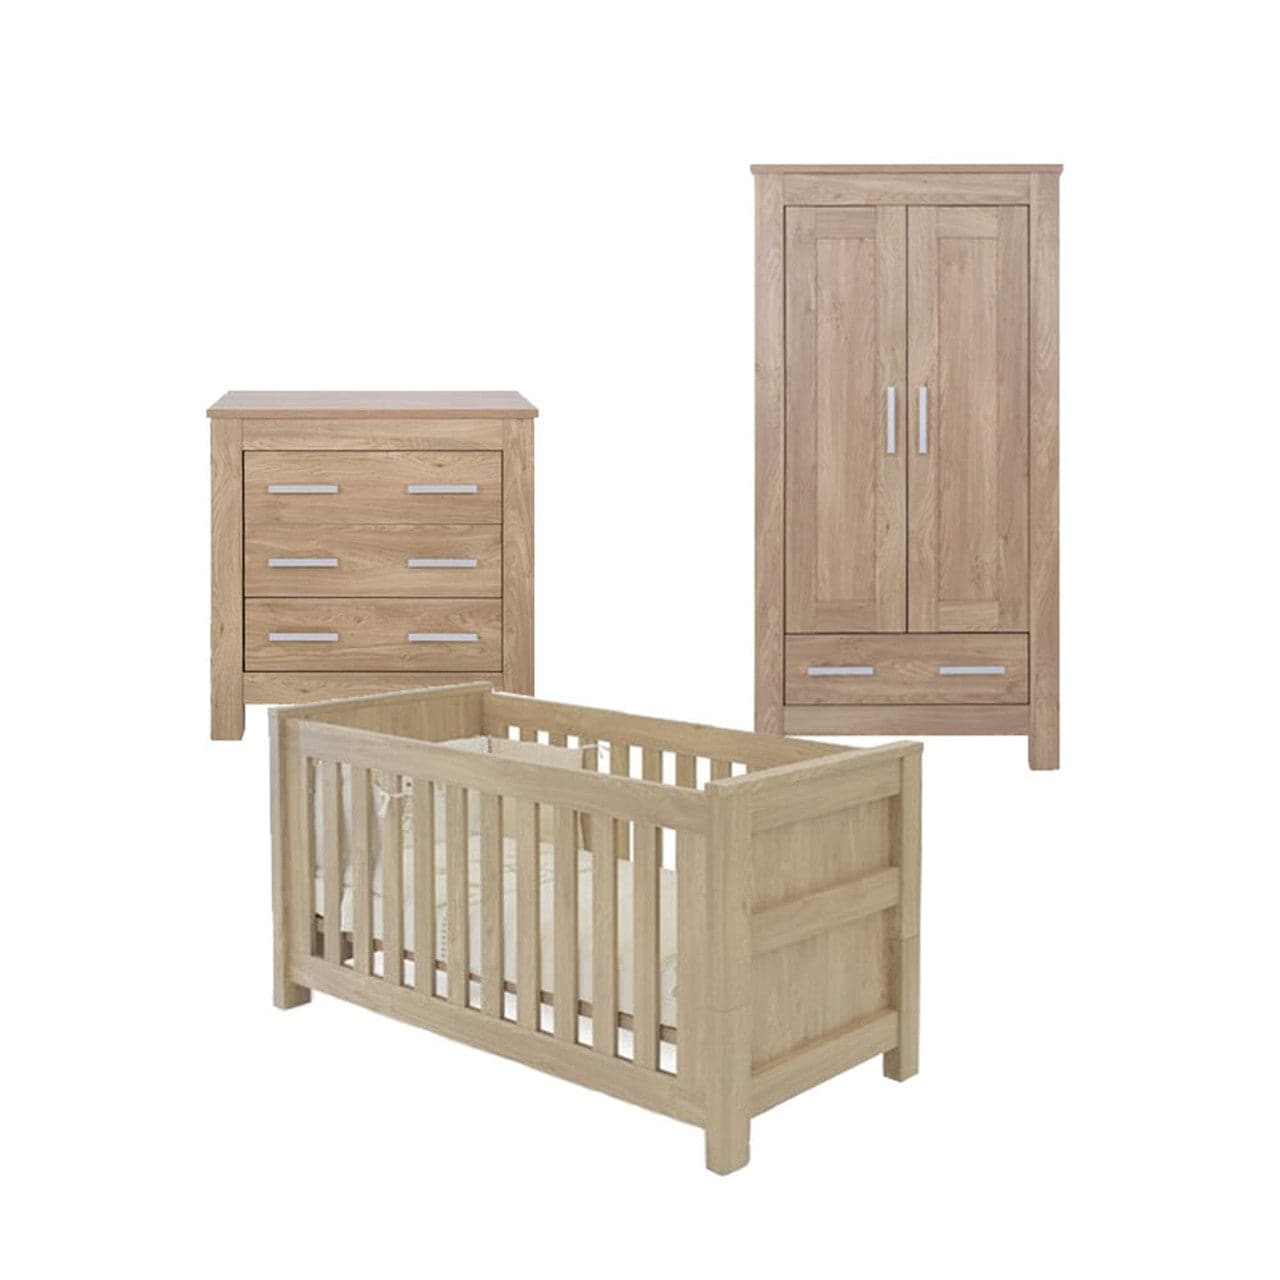 Babystyle Bordeaux Furniture + FREE Sprung Mattress - 3 Piece Room Set -  | For Your Little One